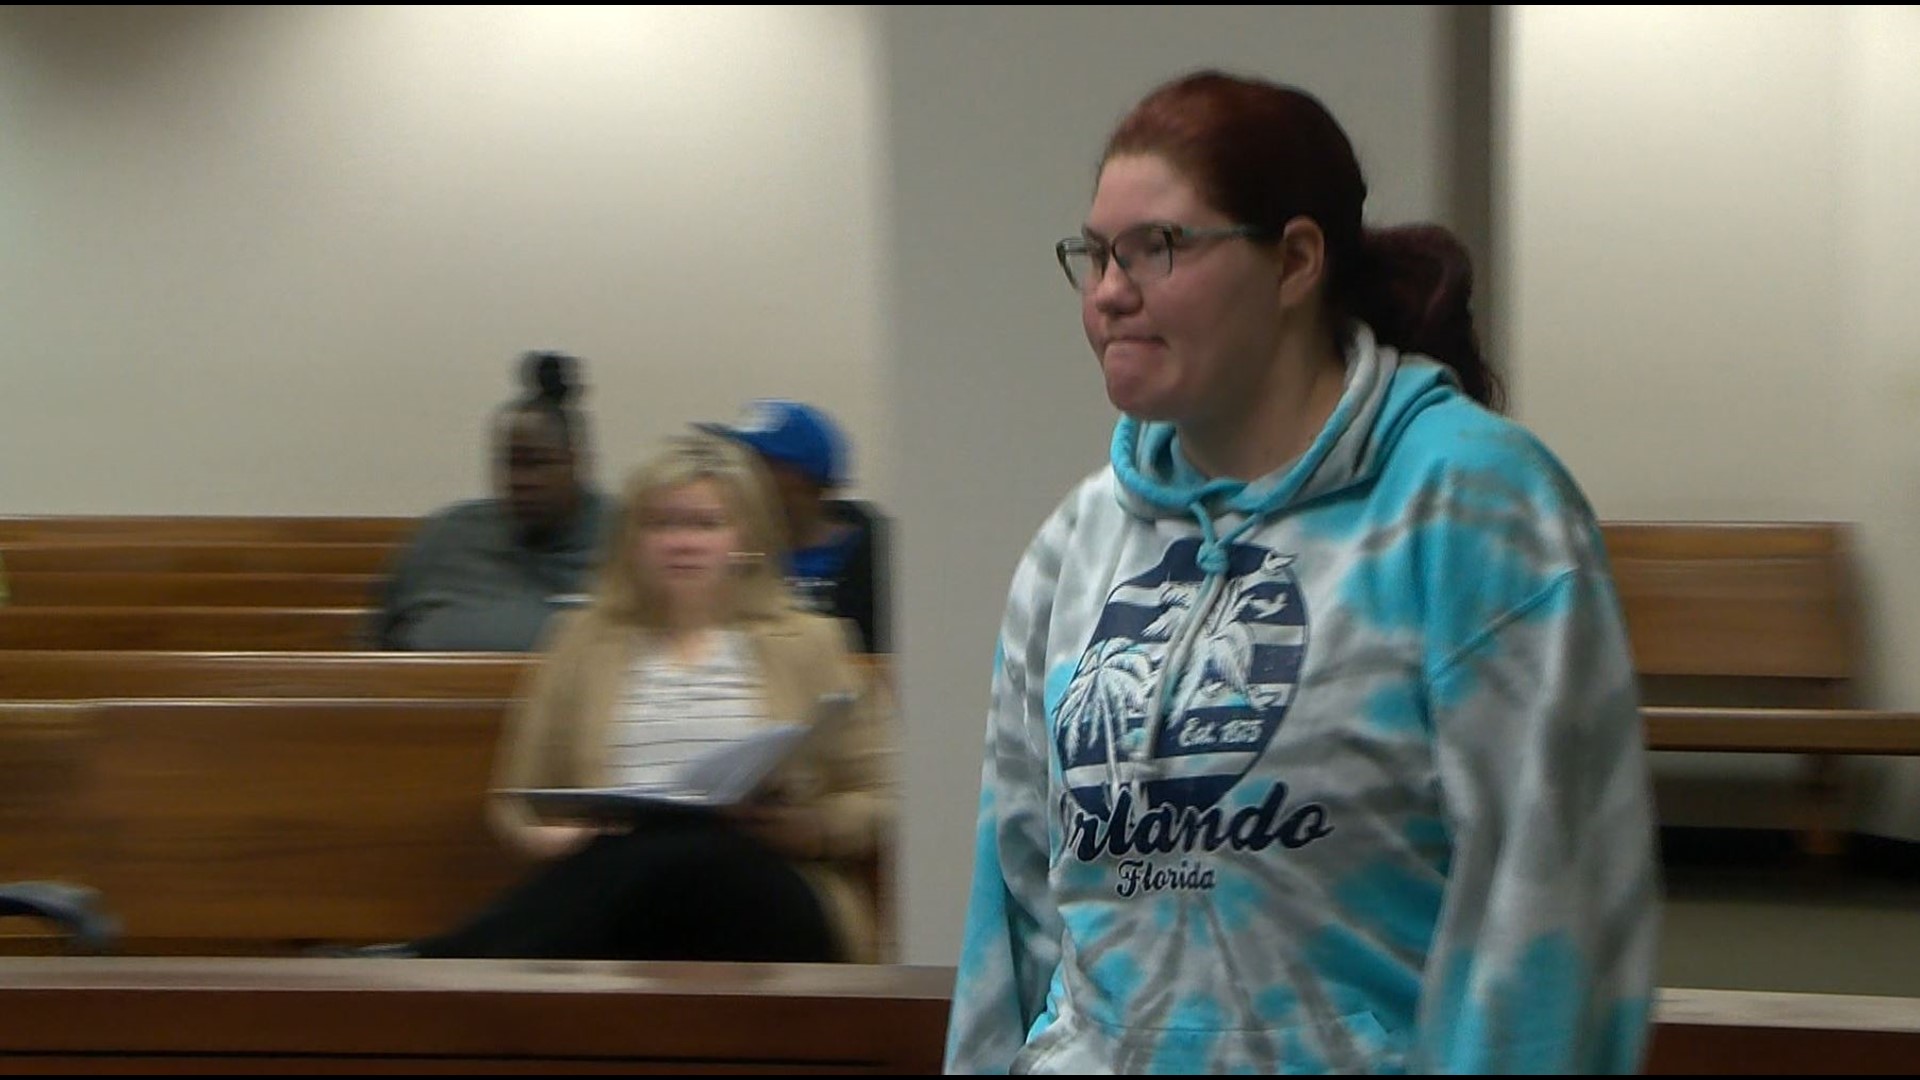 A judge is giving Rachel Flannery 30 days to find a job that has no contact with minors.